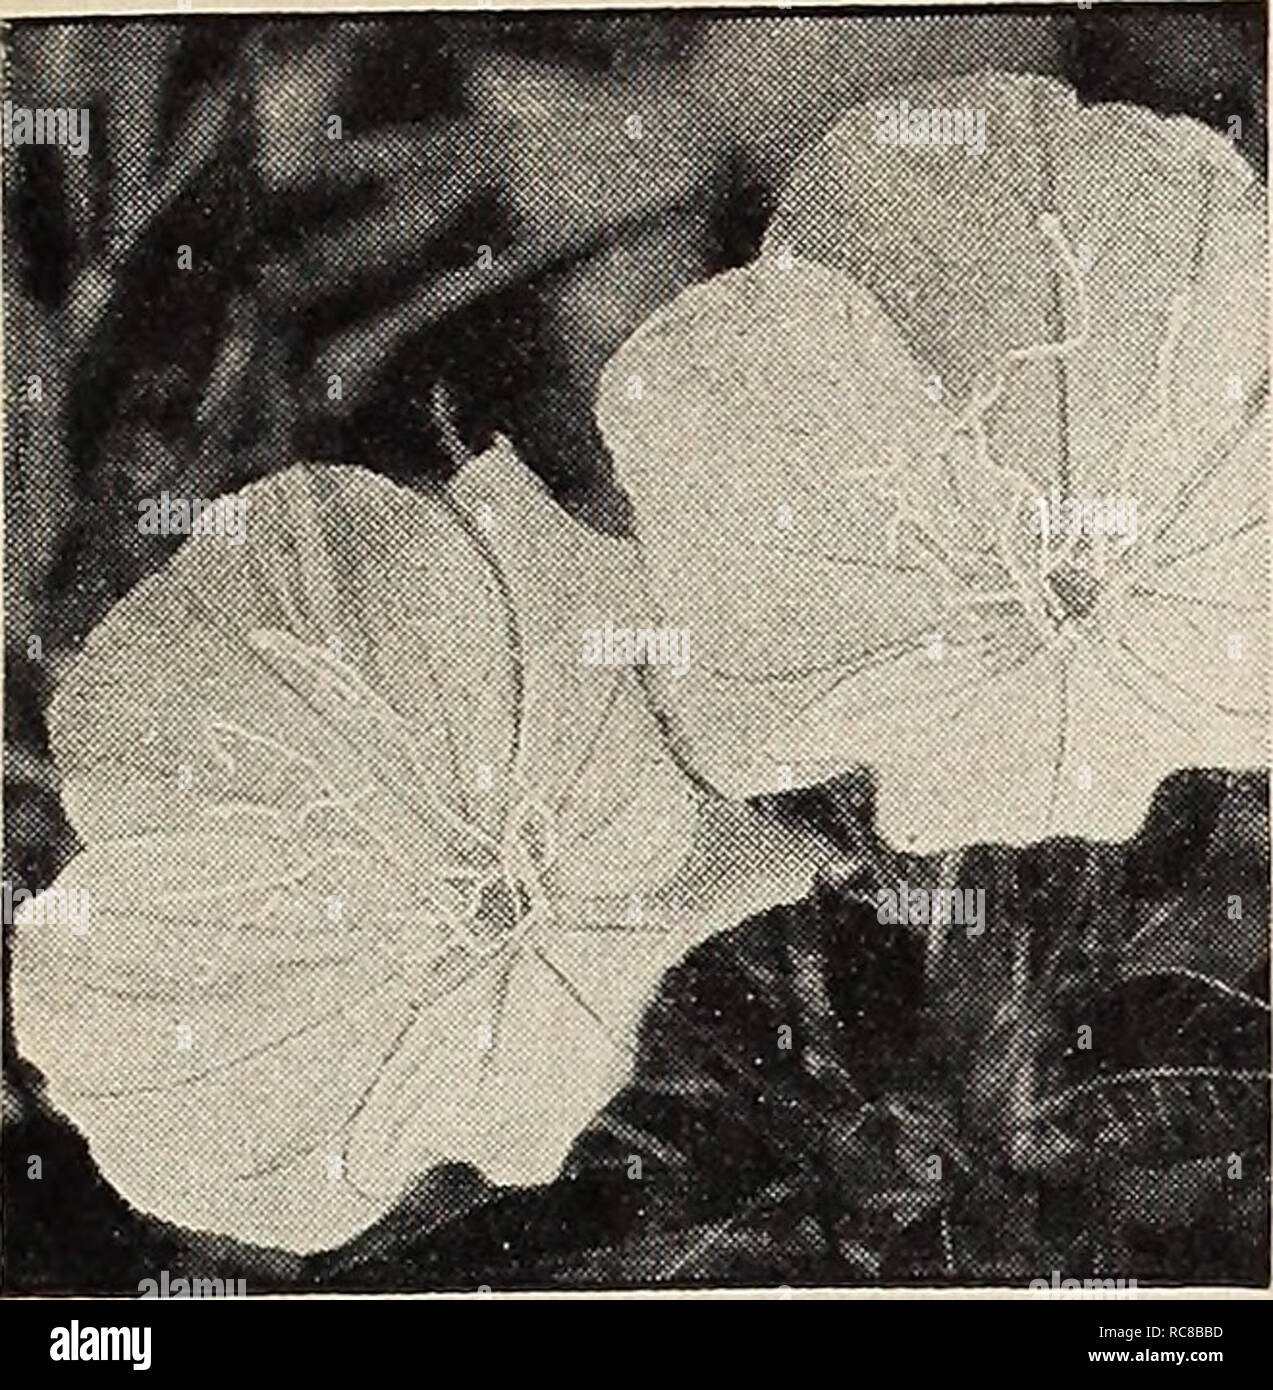 . Dreer's garden book for 1941. Seeds Catalogs; Nursery stock Catalogs; Gardening Equipment and supplies Catalogs; Flowers Seeds Catalogs; Vegetables Seeds Catalogs; Fruit Seeds Catalogs. HENRY A. DREER, Inc., Philadelphia, Pa.. Oenothera missouriensis Oenothera HI a Evening Primrose 3175 Missouriensis. A splendid hardy perennial for an exposed sunny position either in the border or the rockery. Large yellow flowers, fre- quently 5 inches in diameter, produced freely from June until August. 12 inches. Pkt. 15c; large pkt. 75c. Nierembergia ® a 3159 Coerulea (Hippomanica) (Blue Cups). A charmin Stock Photo